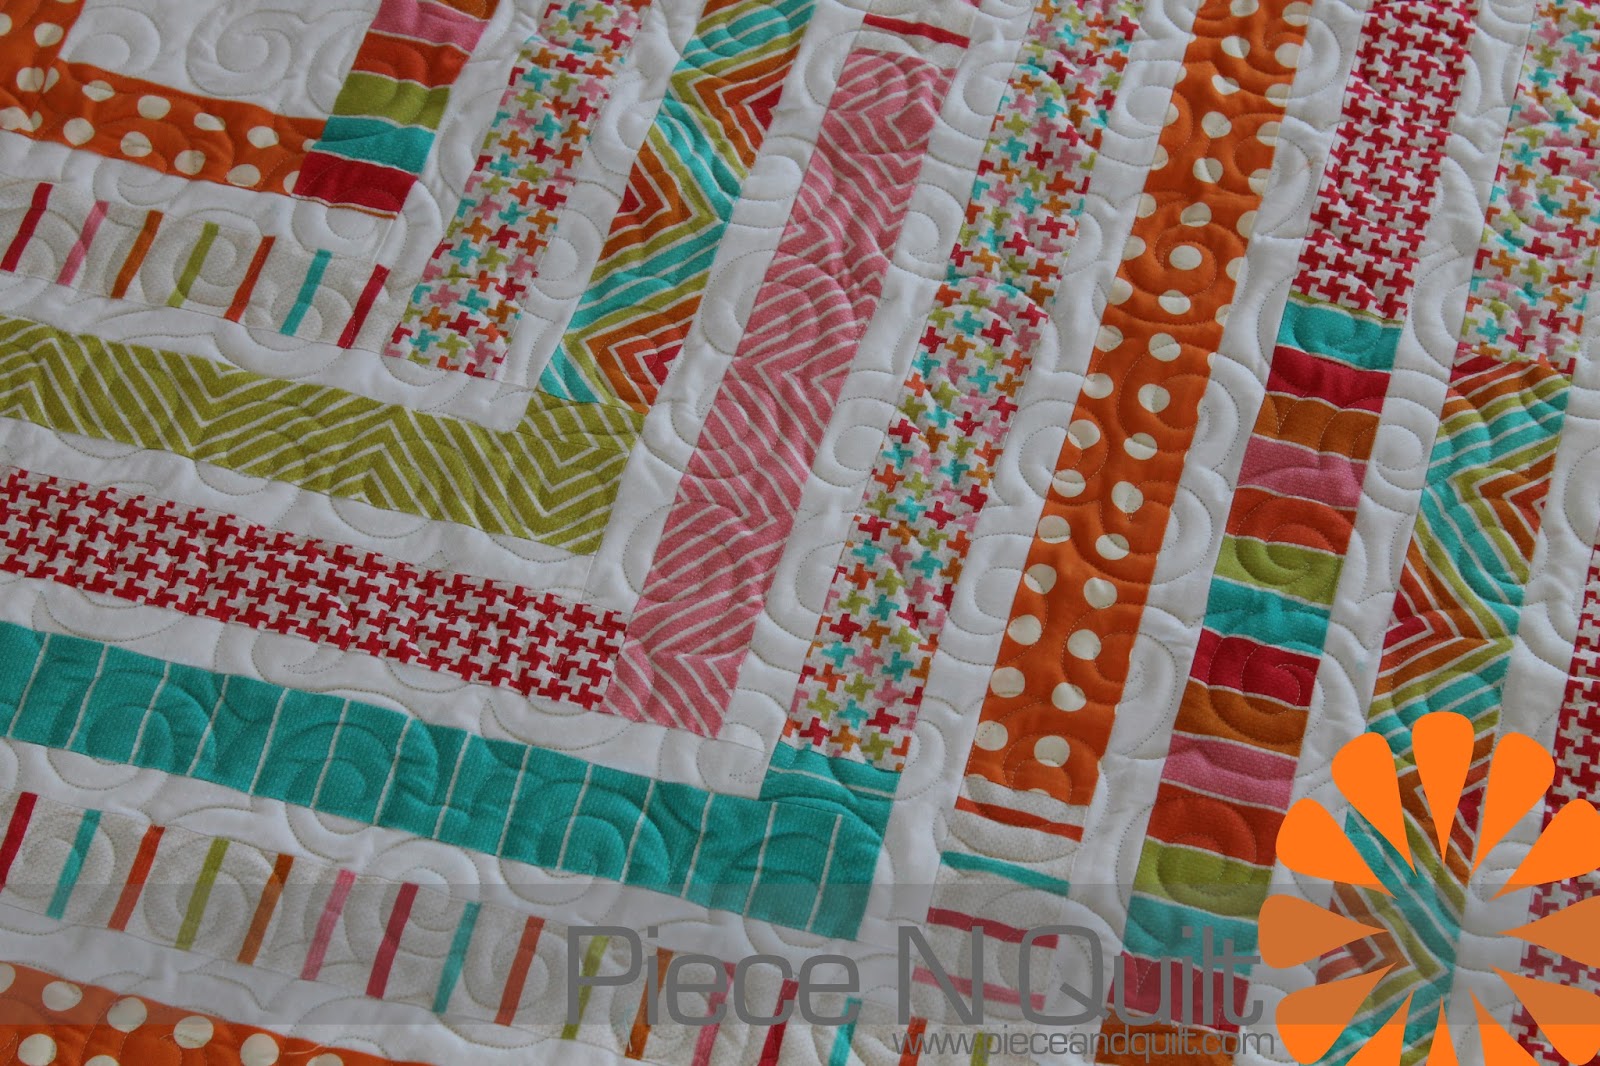 How To Jelly Roll Quilt - Bank2home.com